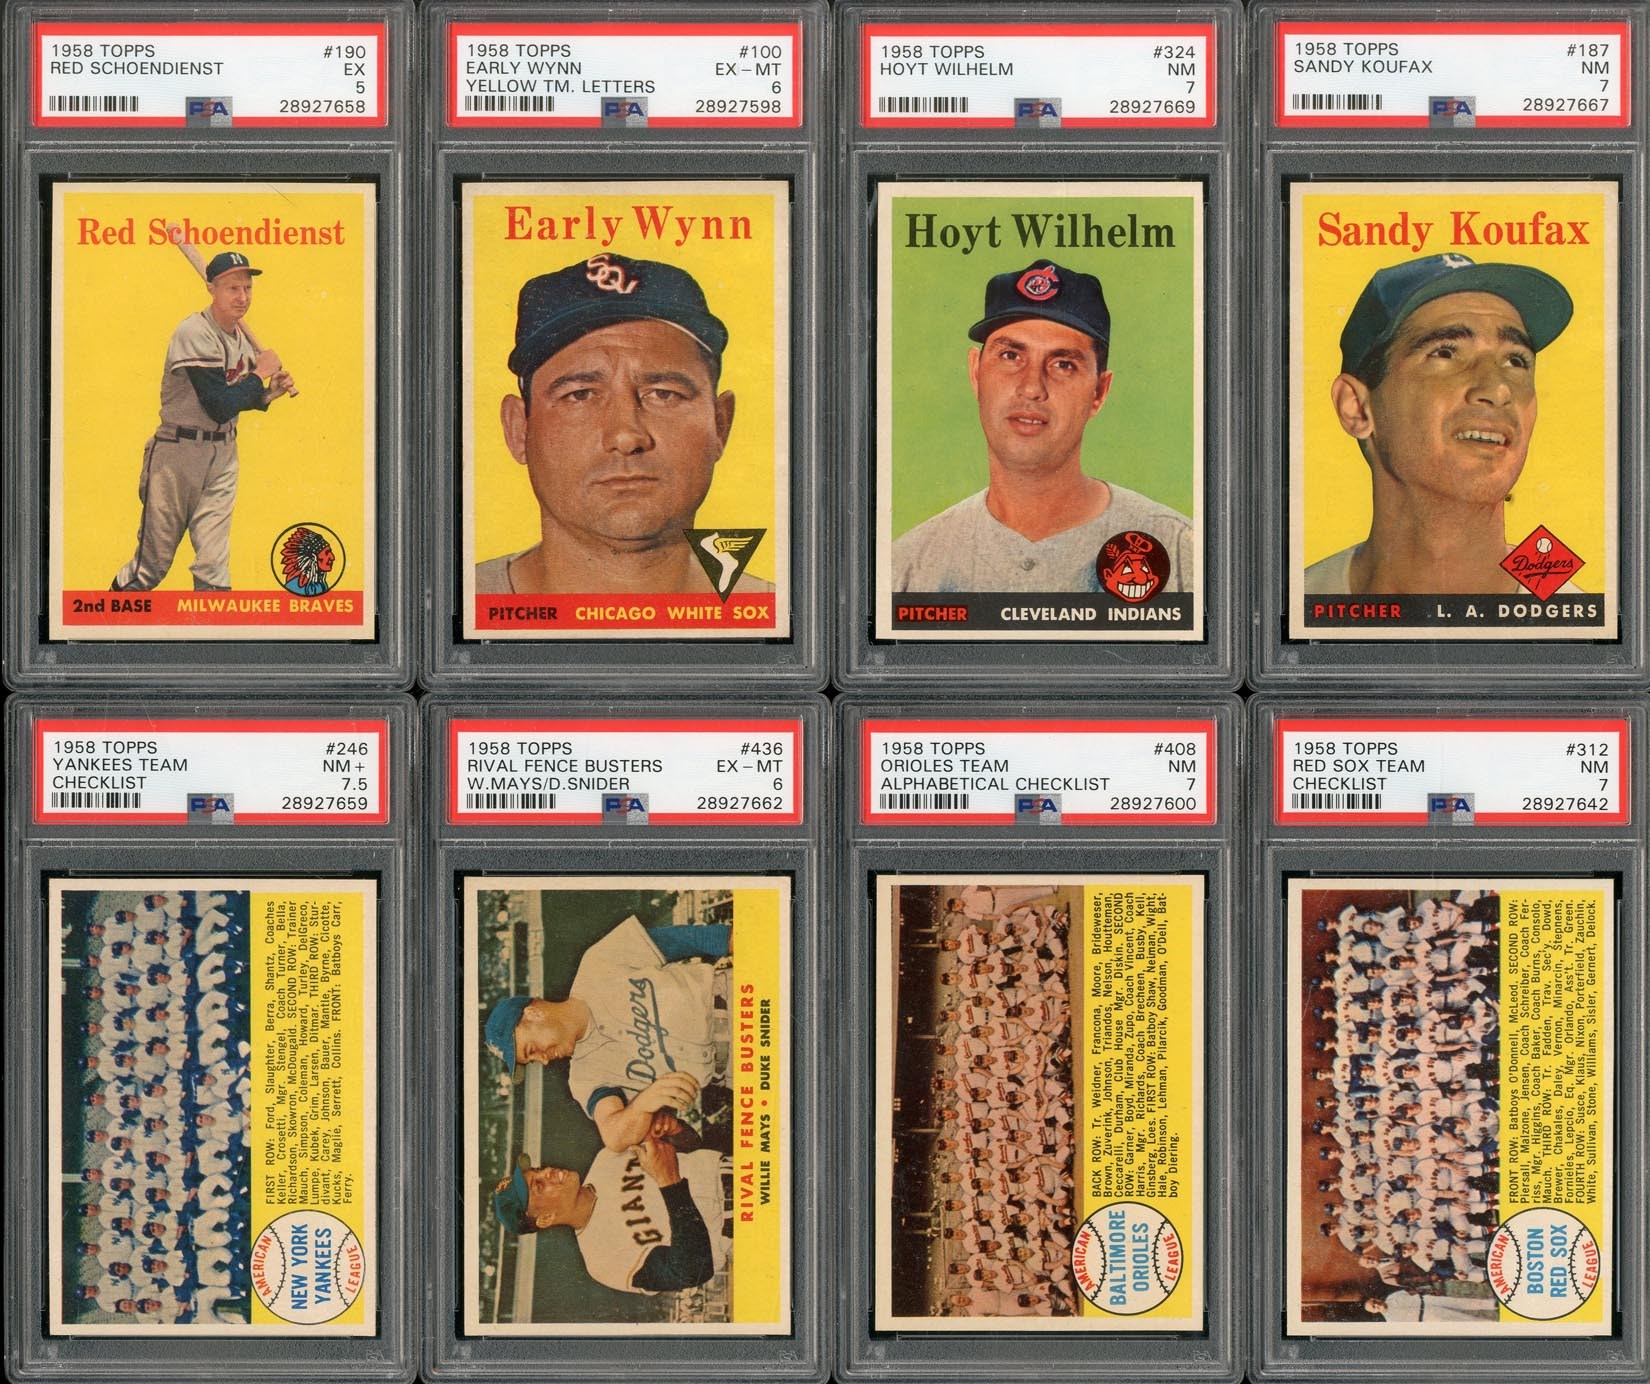 Baseball and Trading Cards - 1958 Topps PSA Graded Collection (37), with Koufax